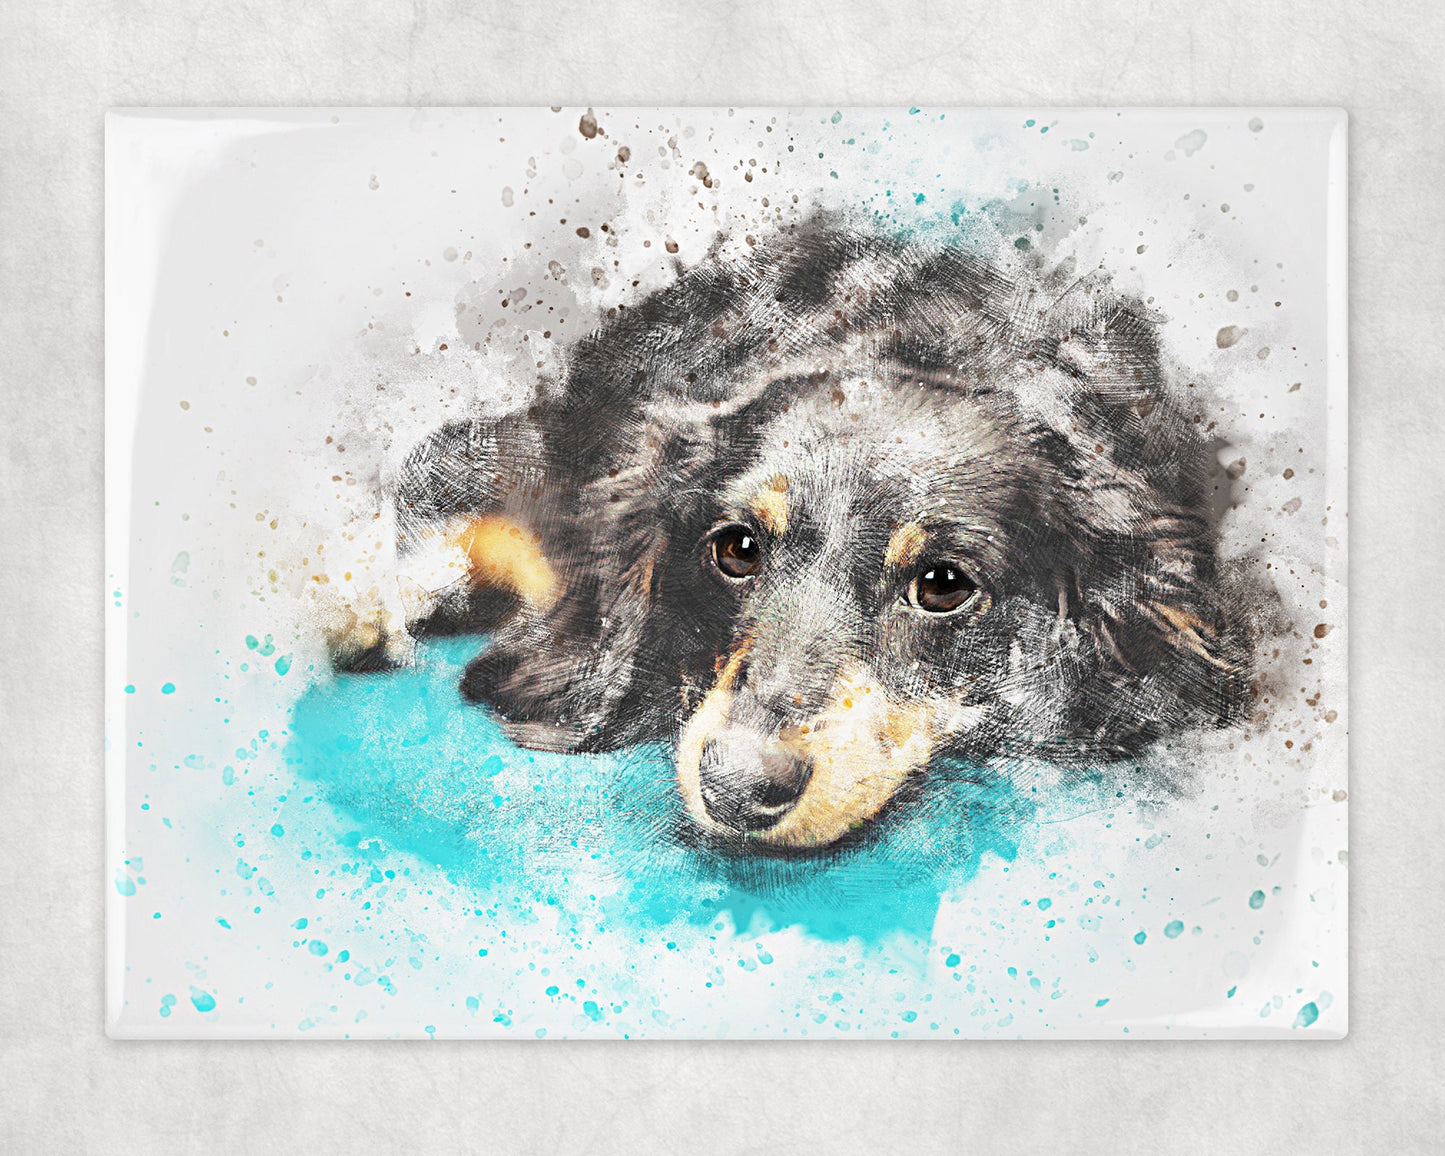 Watercolor Style Dachshund Art Decorative Ceramic Tile with Optional Easel Back - 6x8 inches